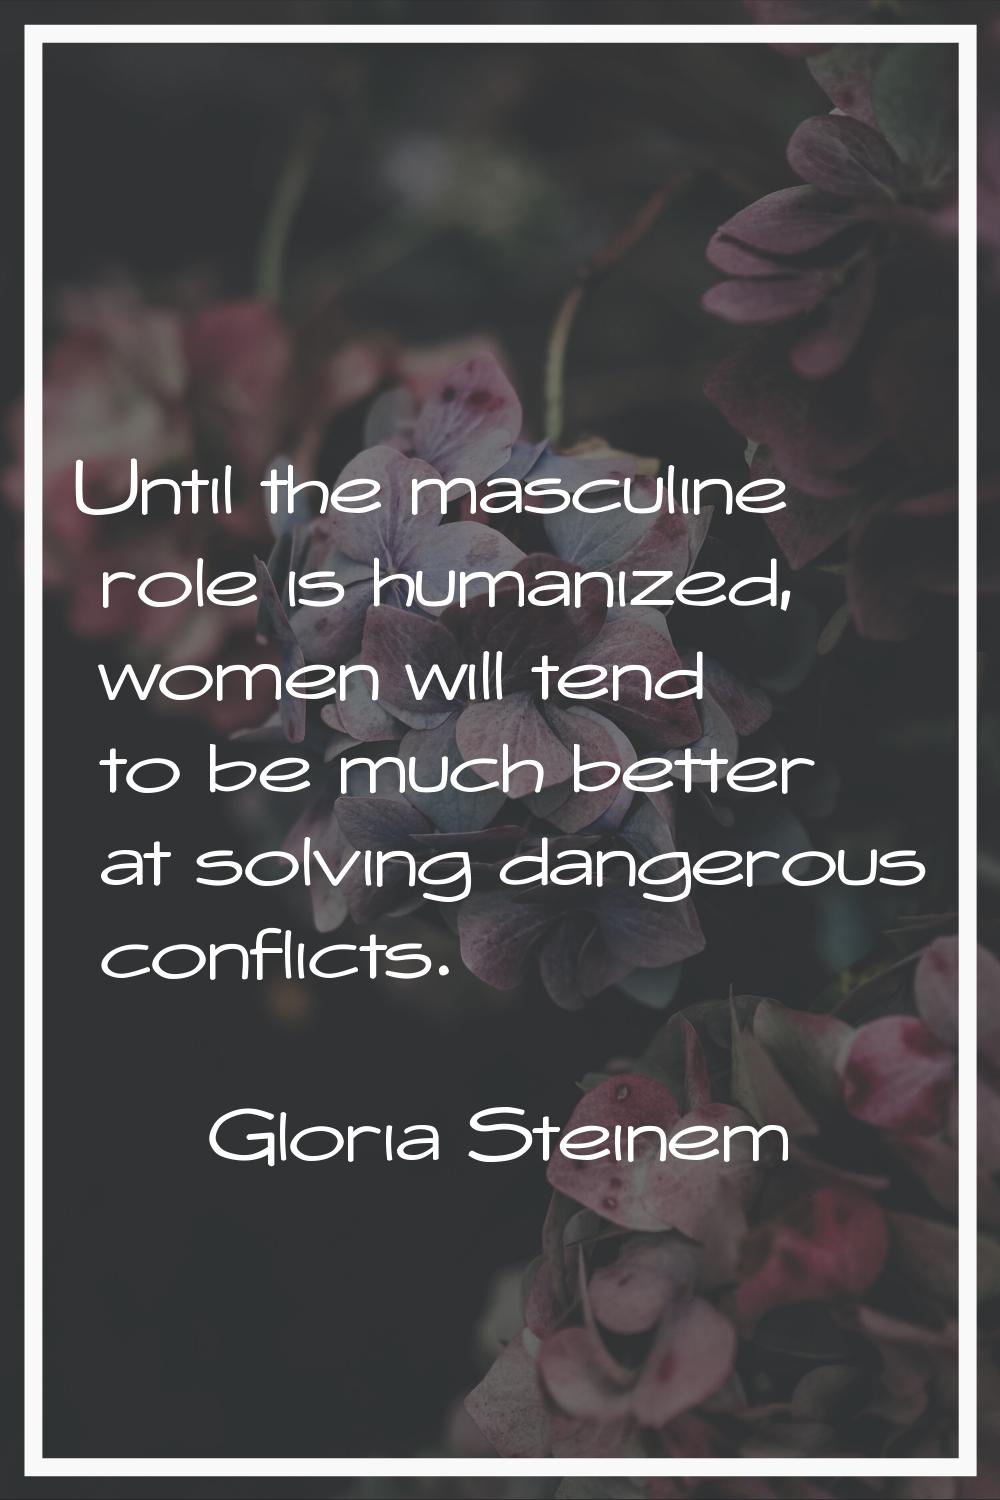 Until the masculine role is humanized, women will tend to be much better at solving dangerous confl